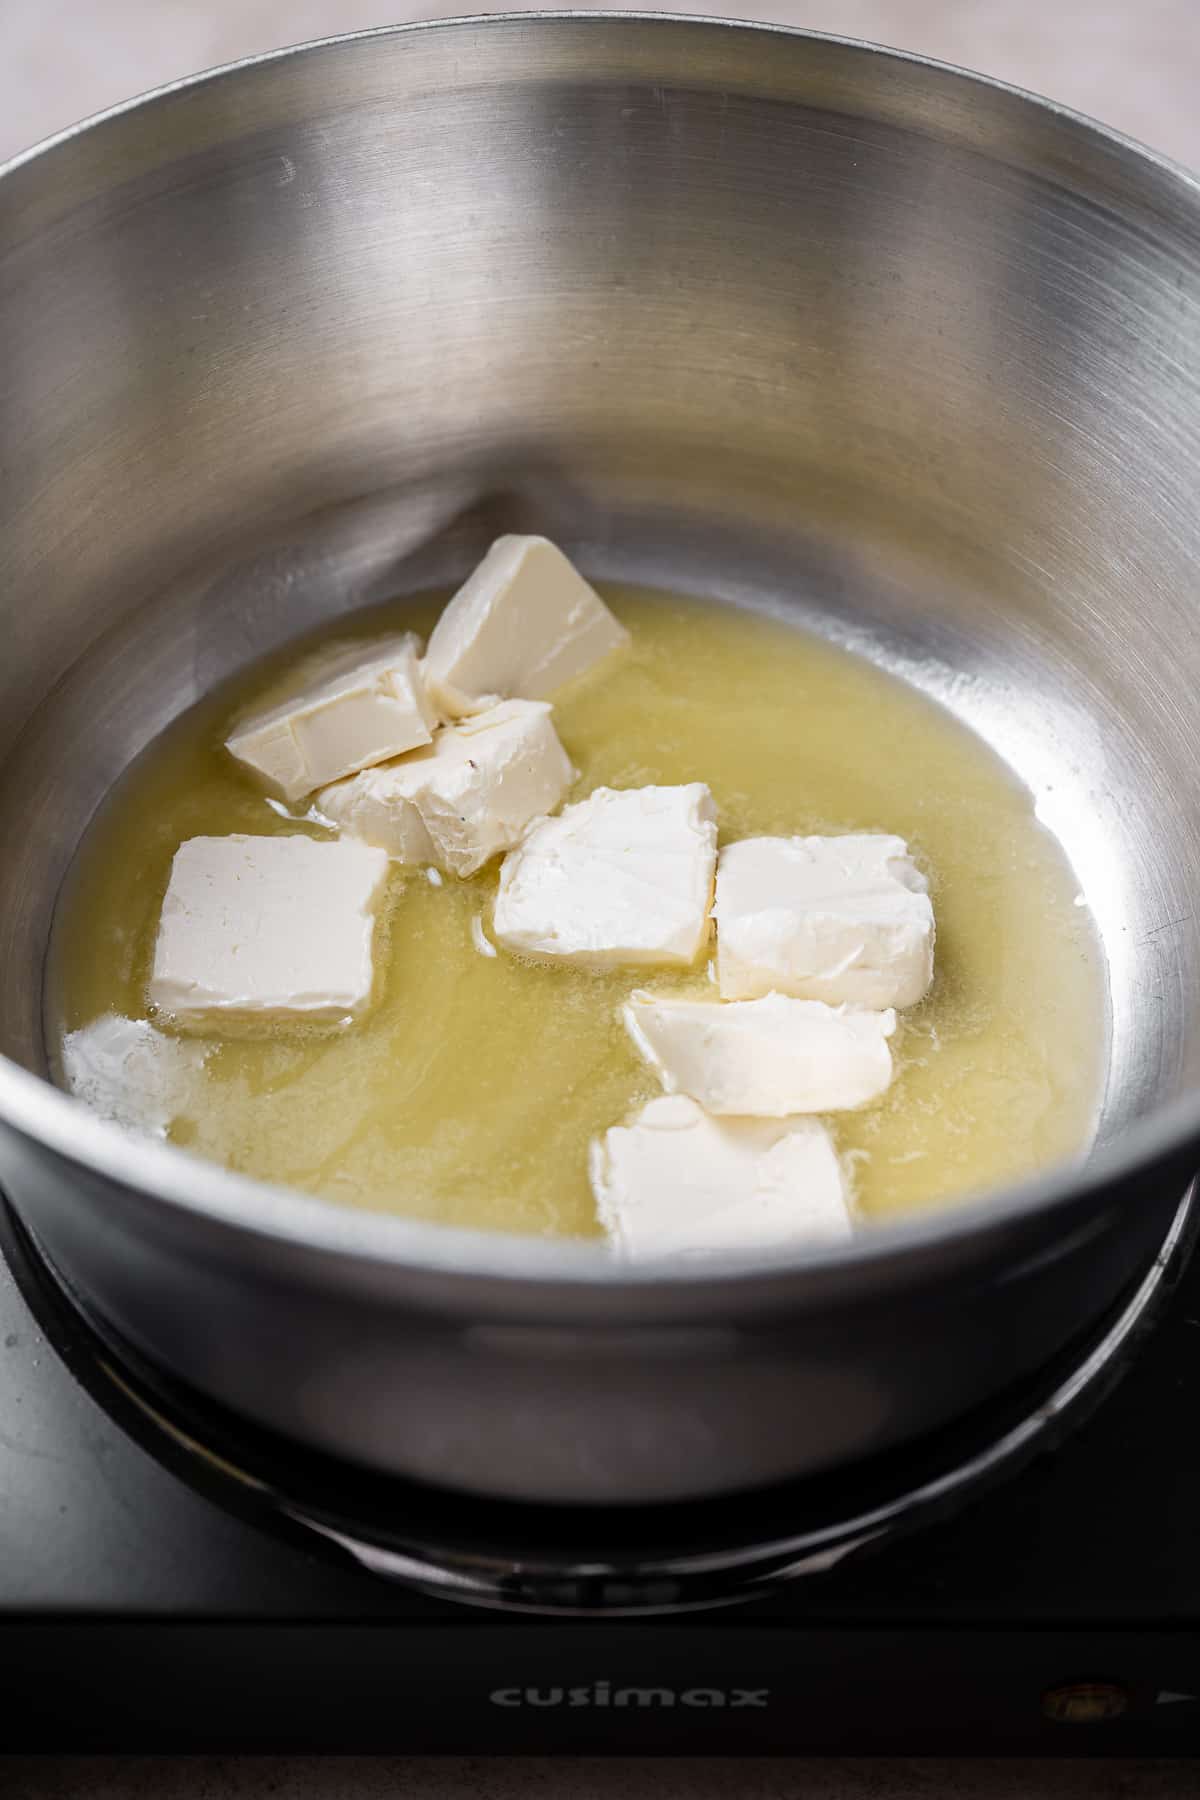 butter being melted in a saucepan.